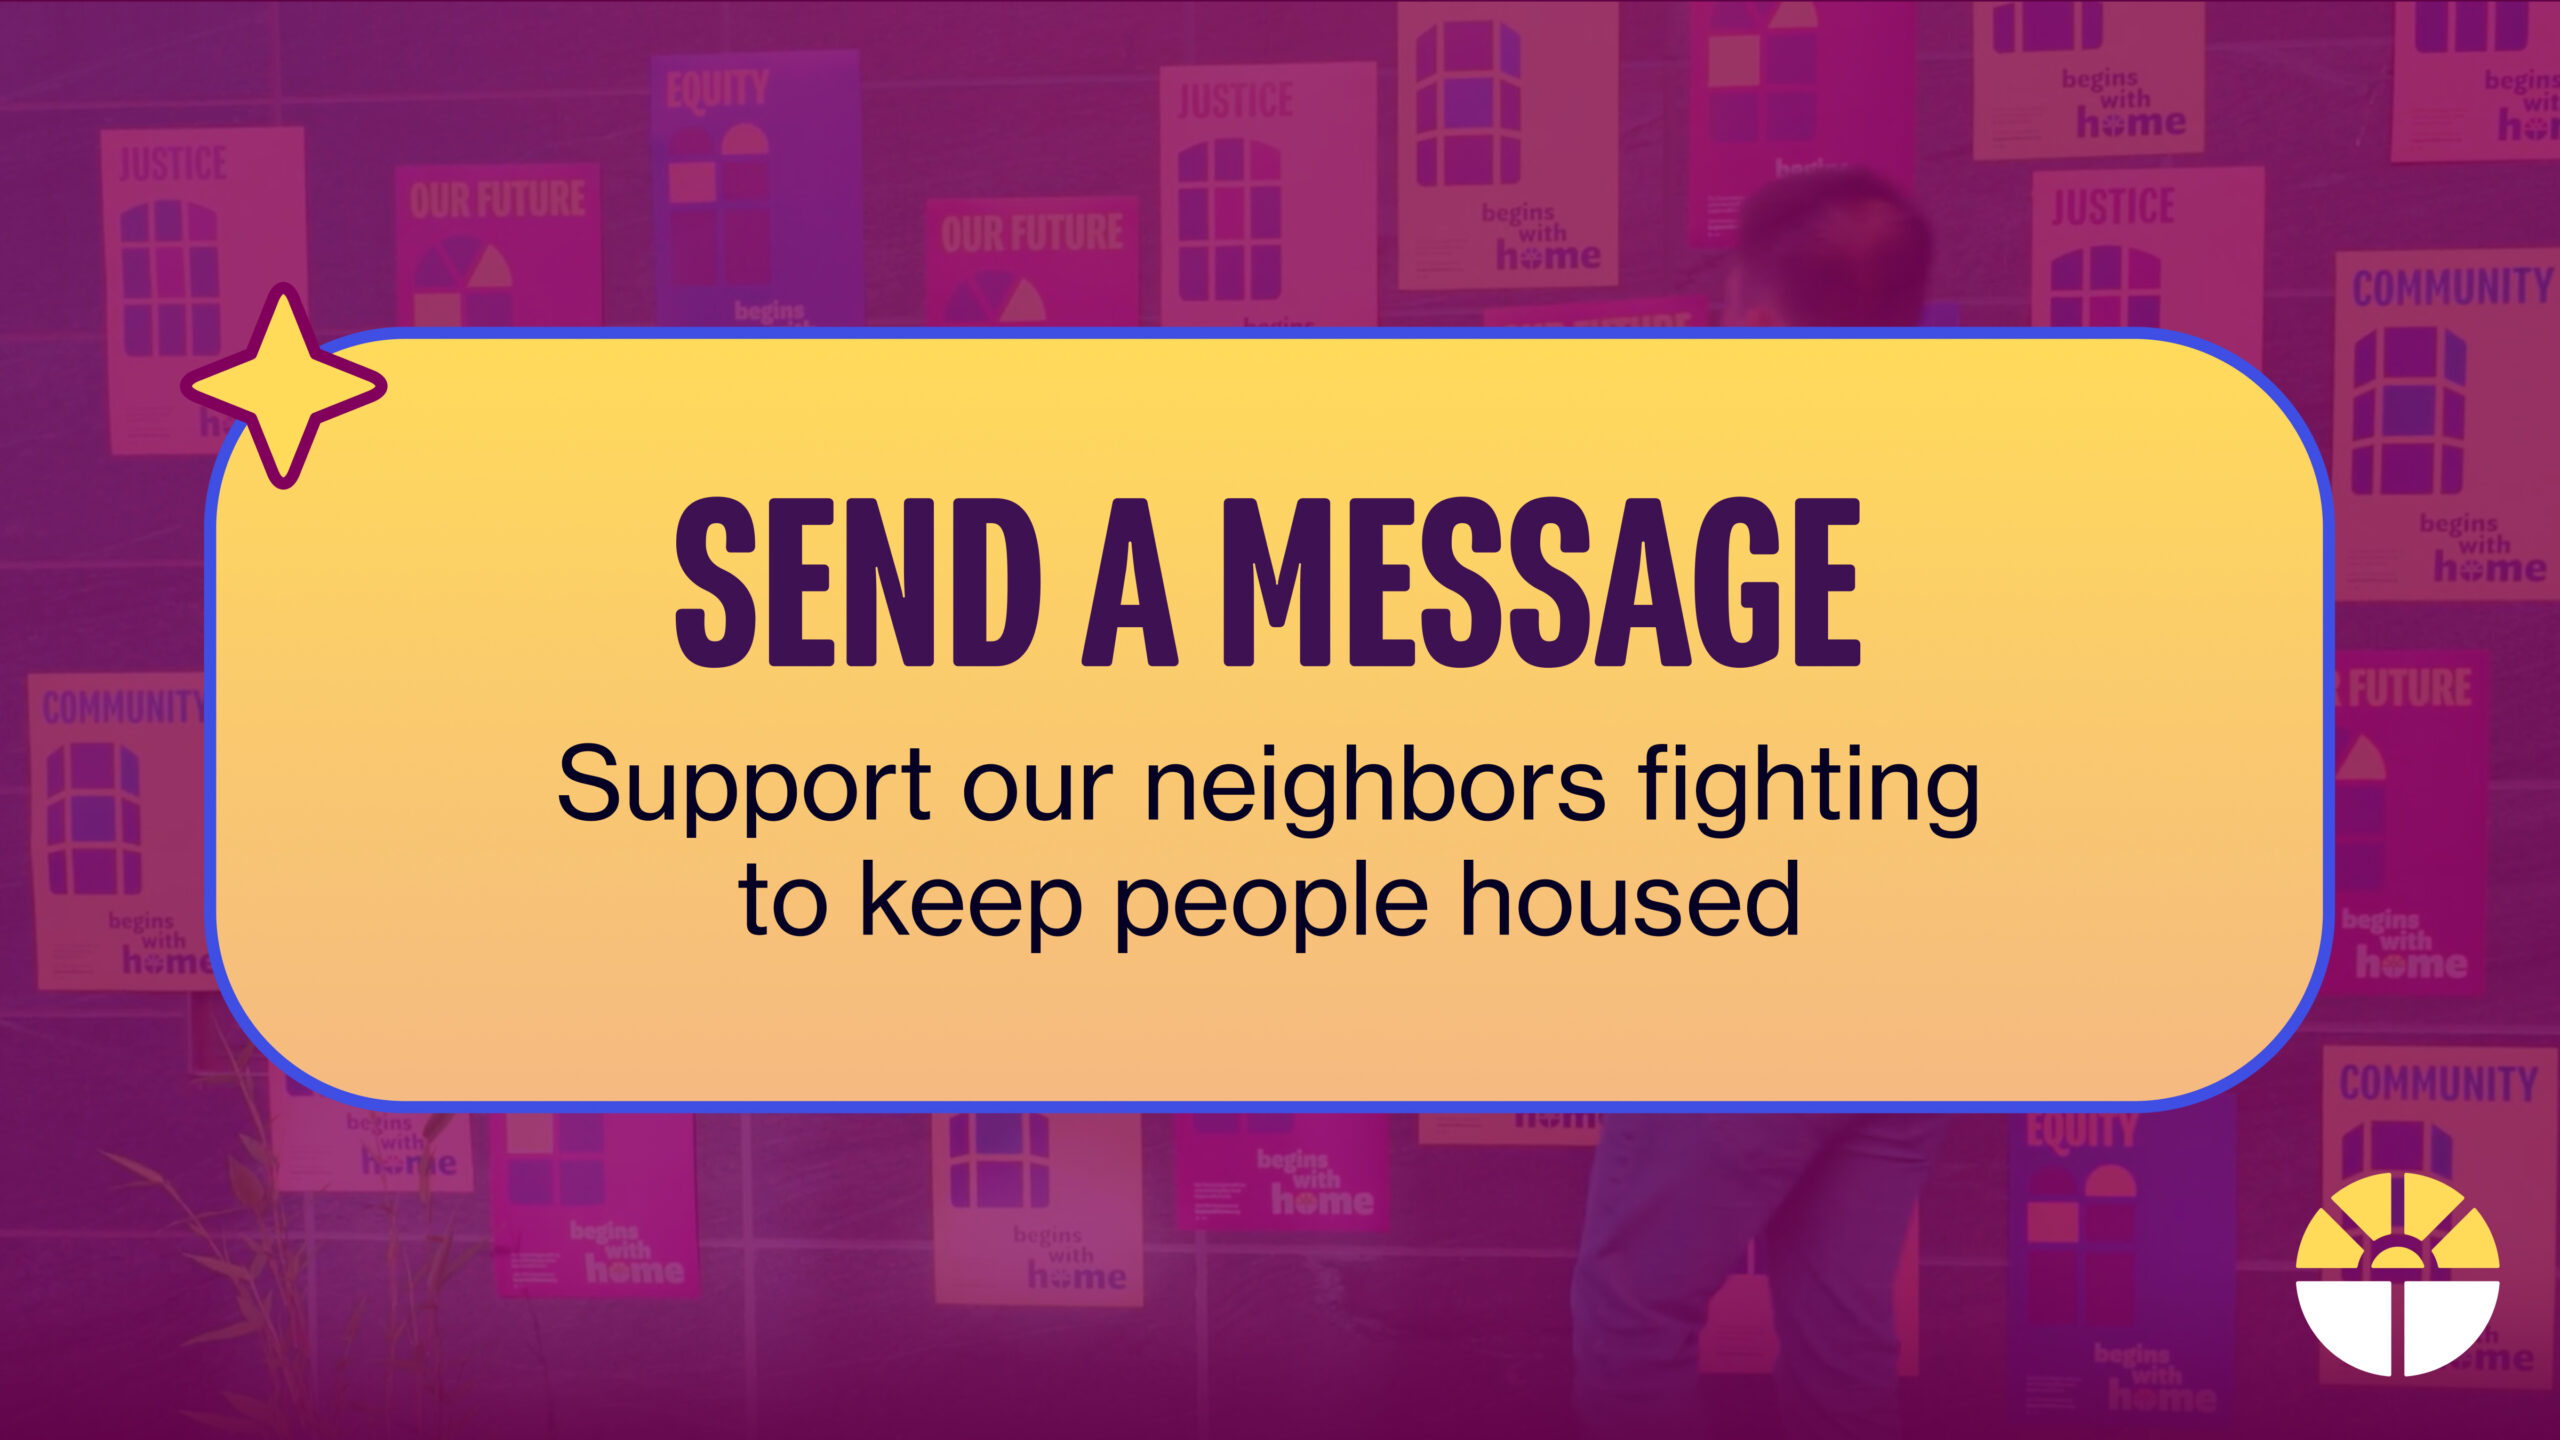 Send a message: Support our neighbors fighting to keep people housed